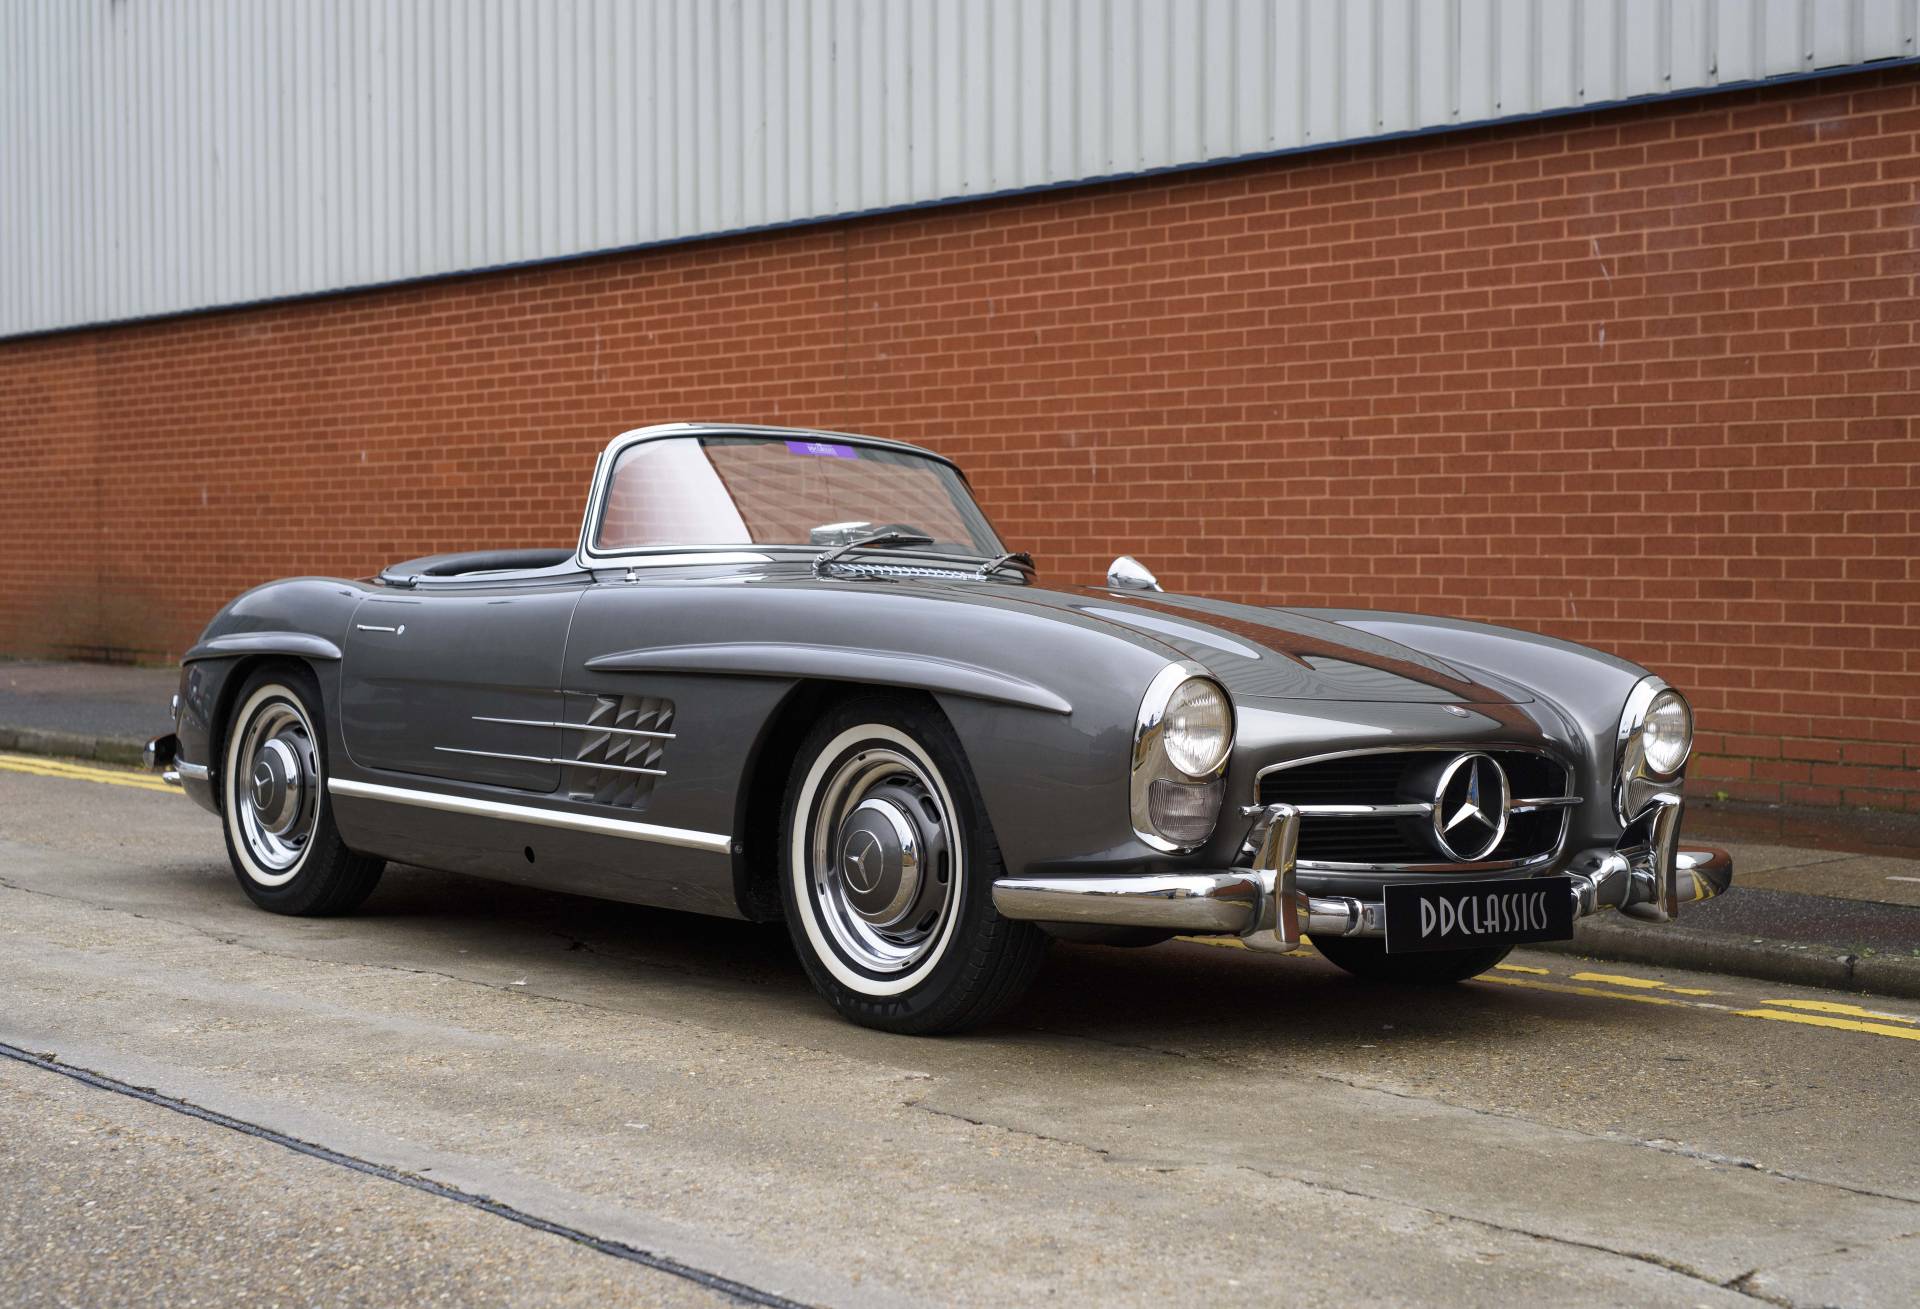 For Sale Mercedes Benz 300 SL Roadster 1958 offered for GBP 985 000